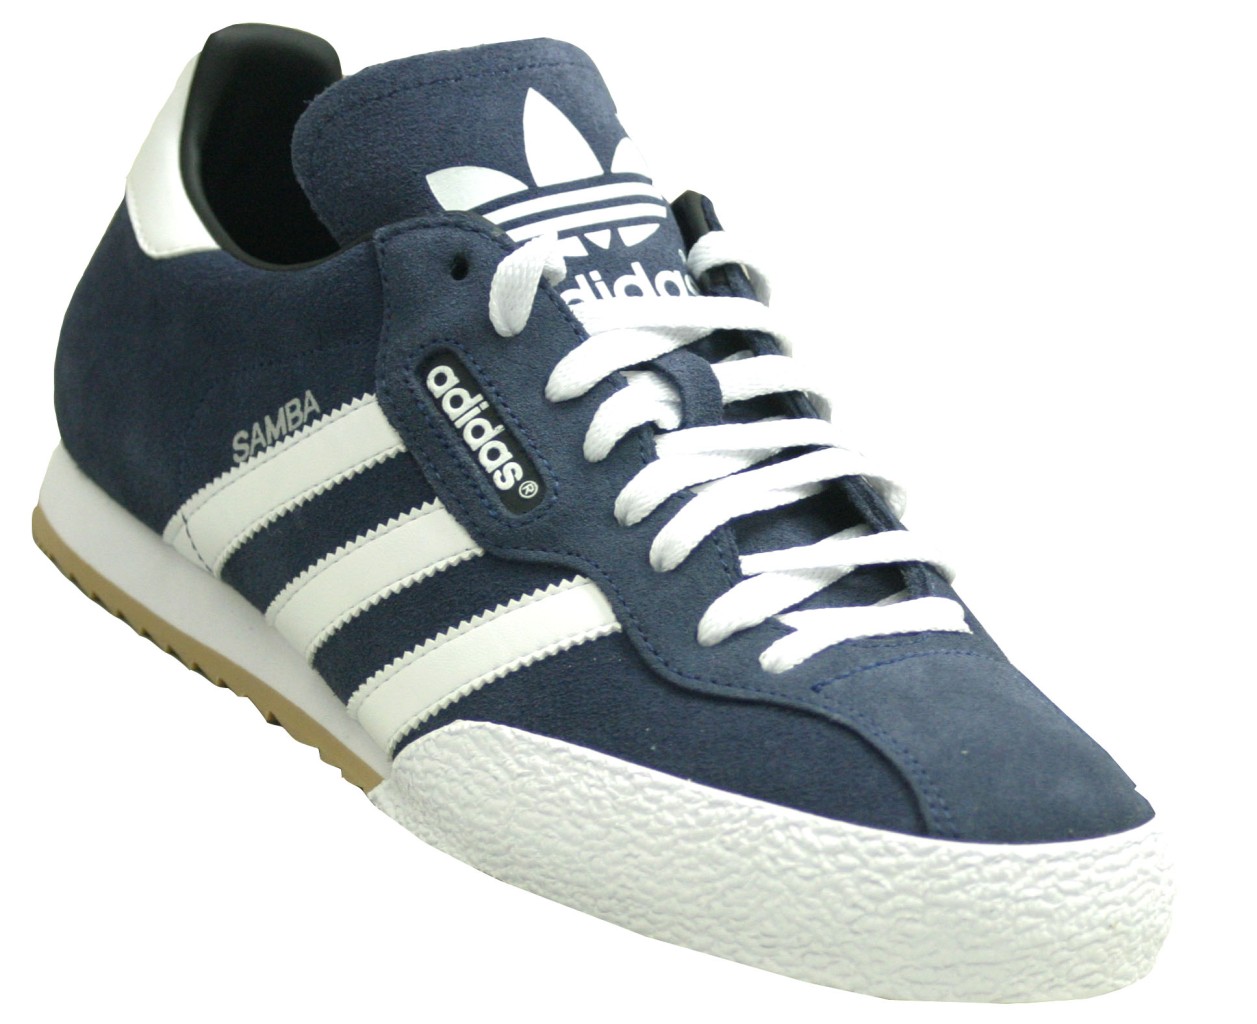 NEW MENS ADIDAS SAMBA SUPER SUEDE TRAINERS Indoor football SIZE UK7 8 9 ...